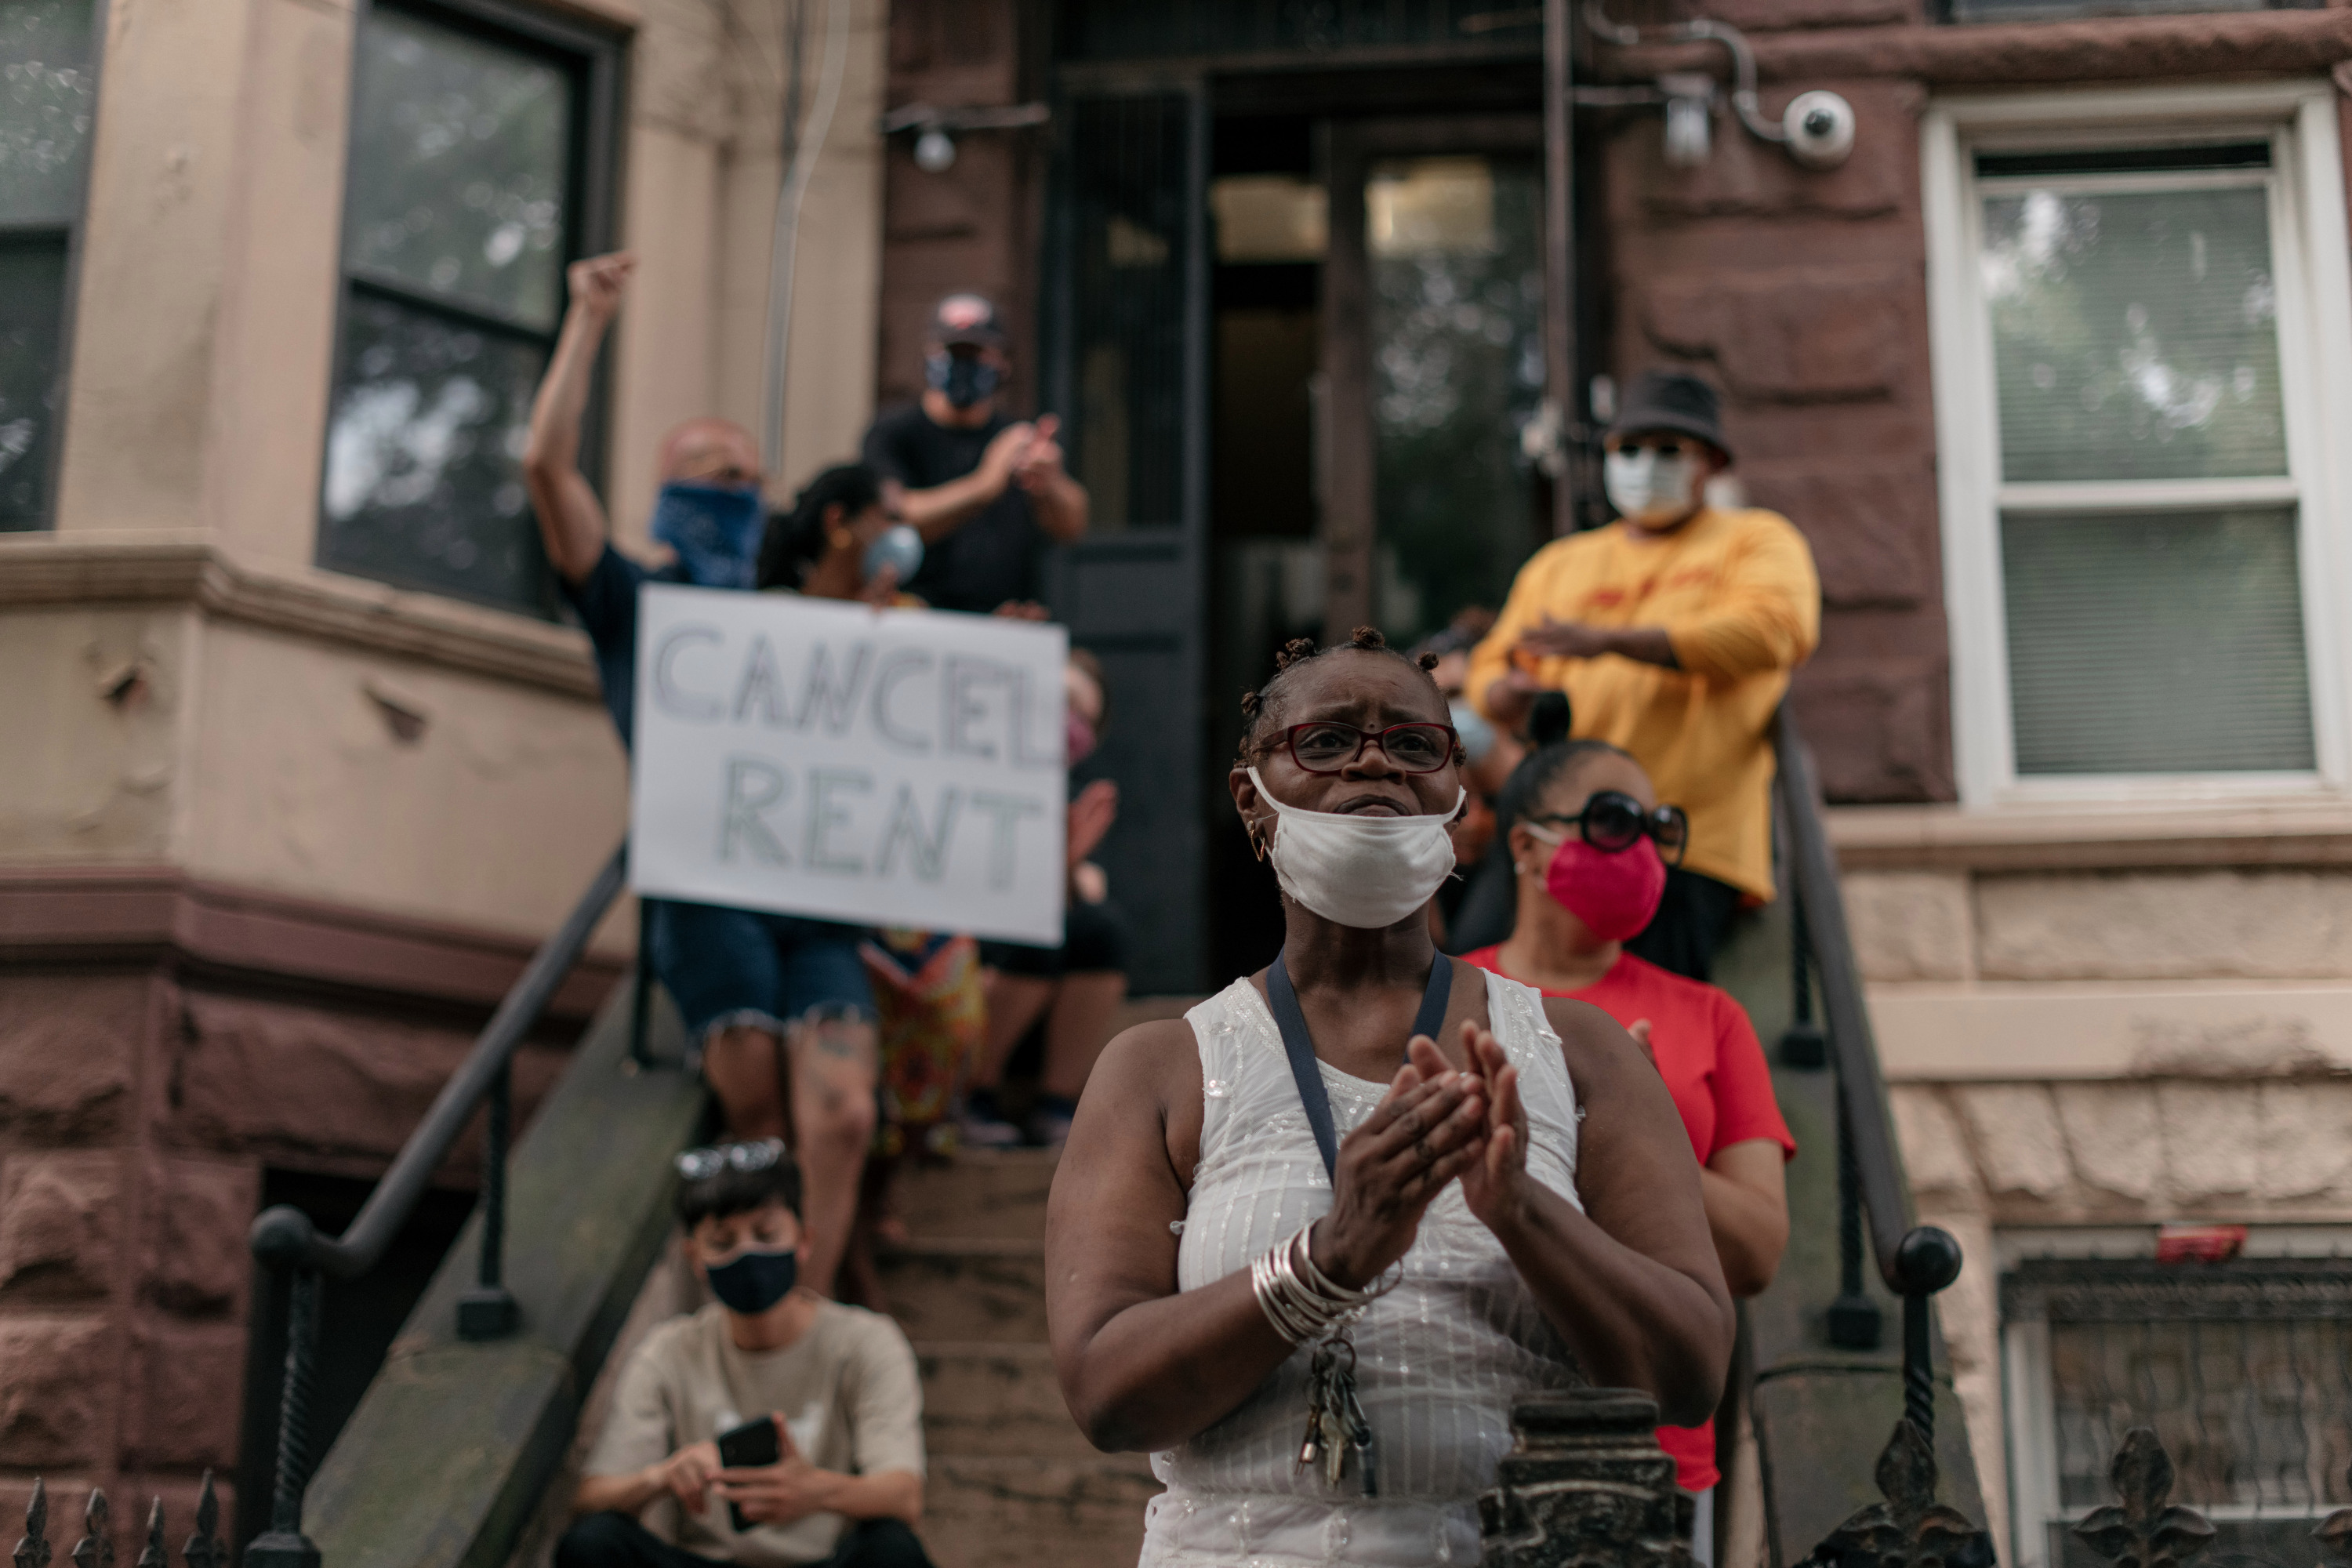 Activists gather in Brooklyn to cancel rent.